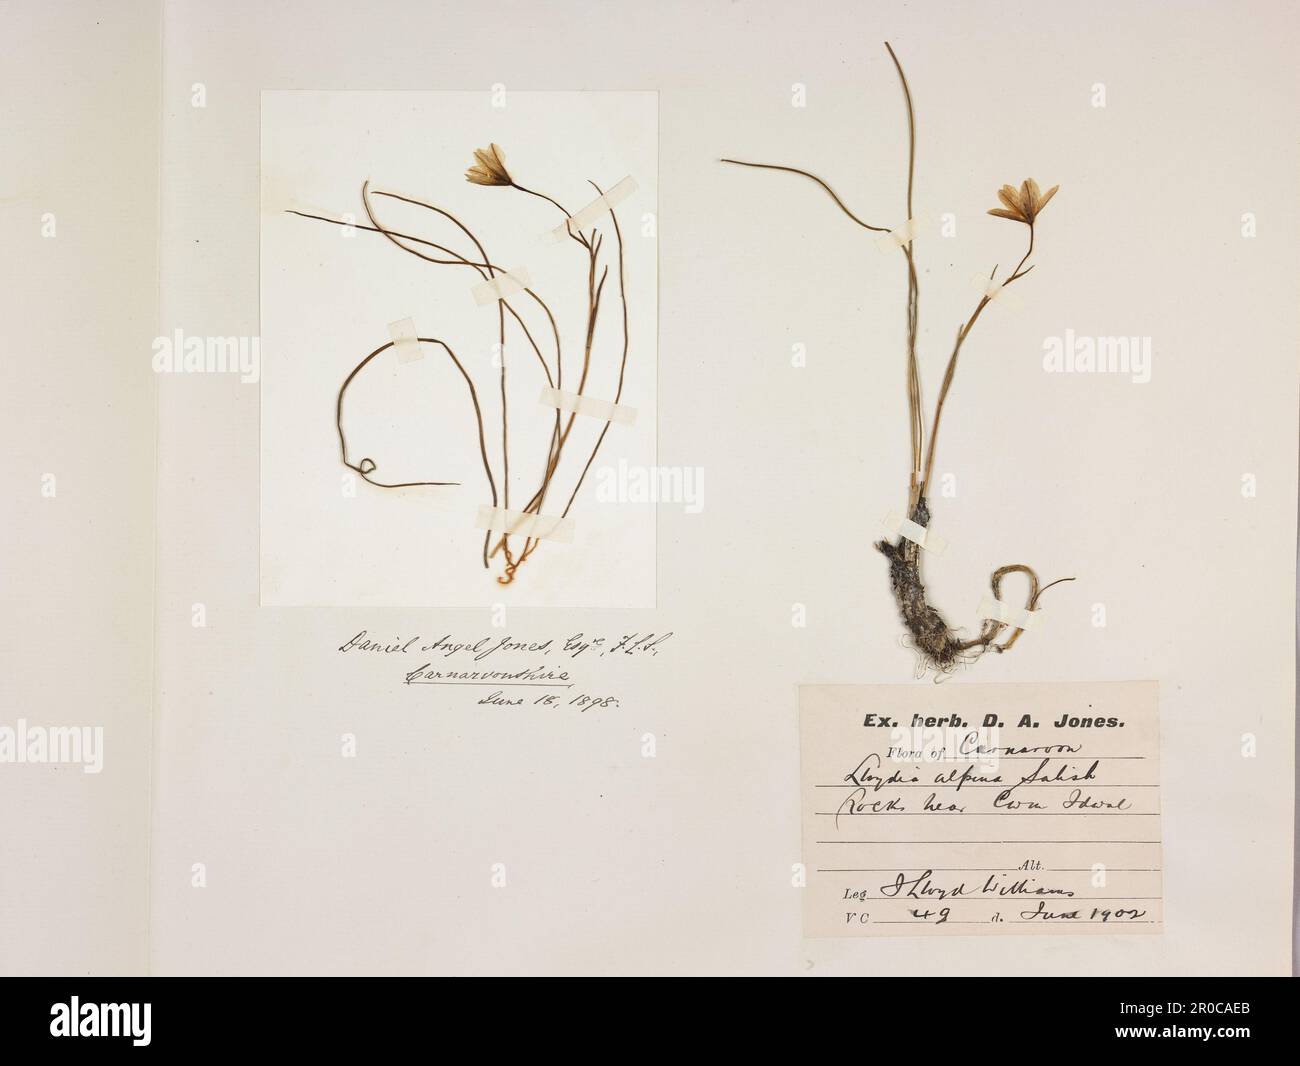 Snowdon Lily (Lloydia Serotina/ Gagea Serotina) herbarium sheet, 1898 & 1902. Other names: Brwynddail y Mynydd... This plant grows in extreme mountain conditions in Snowdonia National Park, Wales. It became a protected species in the UK in 1975 under the Conservation of Wild Creatures and Wild Plants Act... Changing Planet Exhibition, Thinktank 2021 Stock Photo